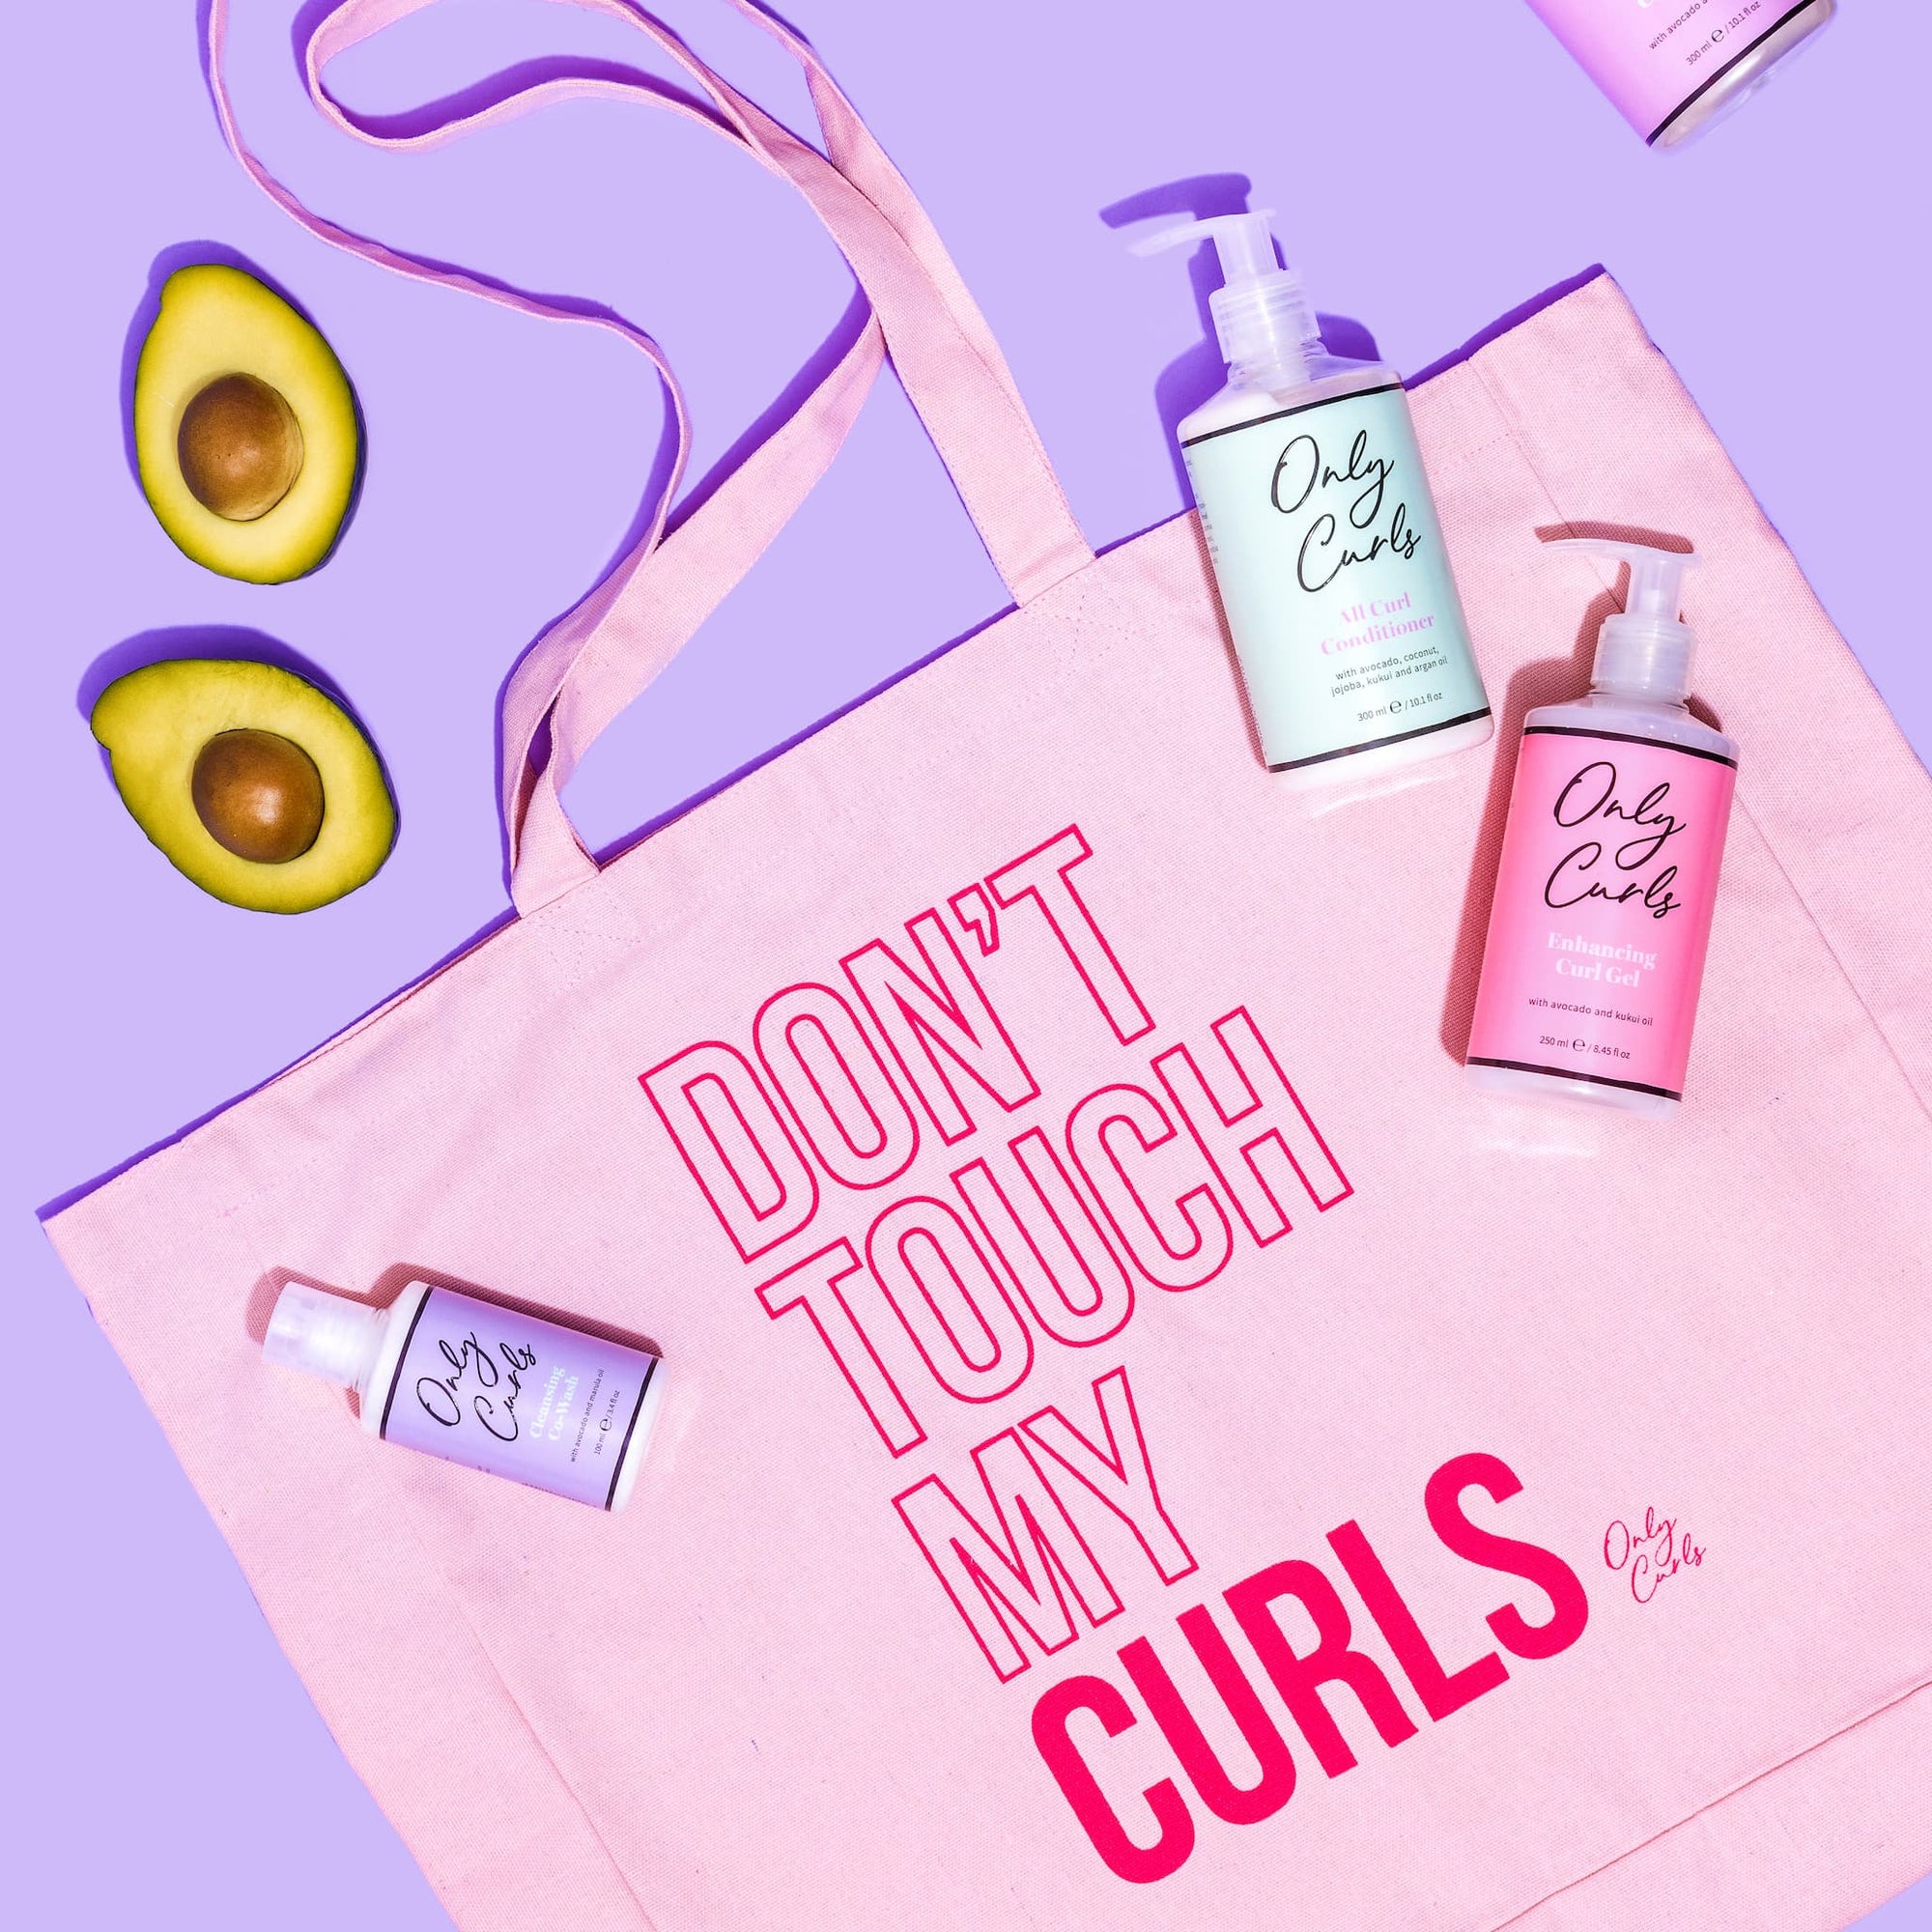 Only Curls Tote Bag - Don't Touch My Curls Pink - Only Curls